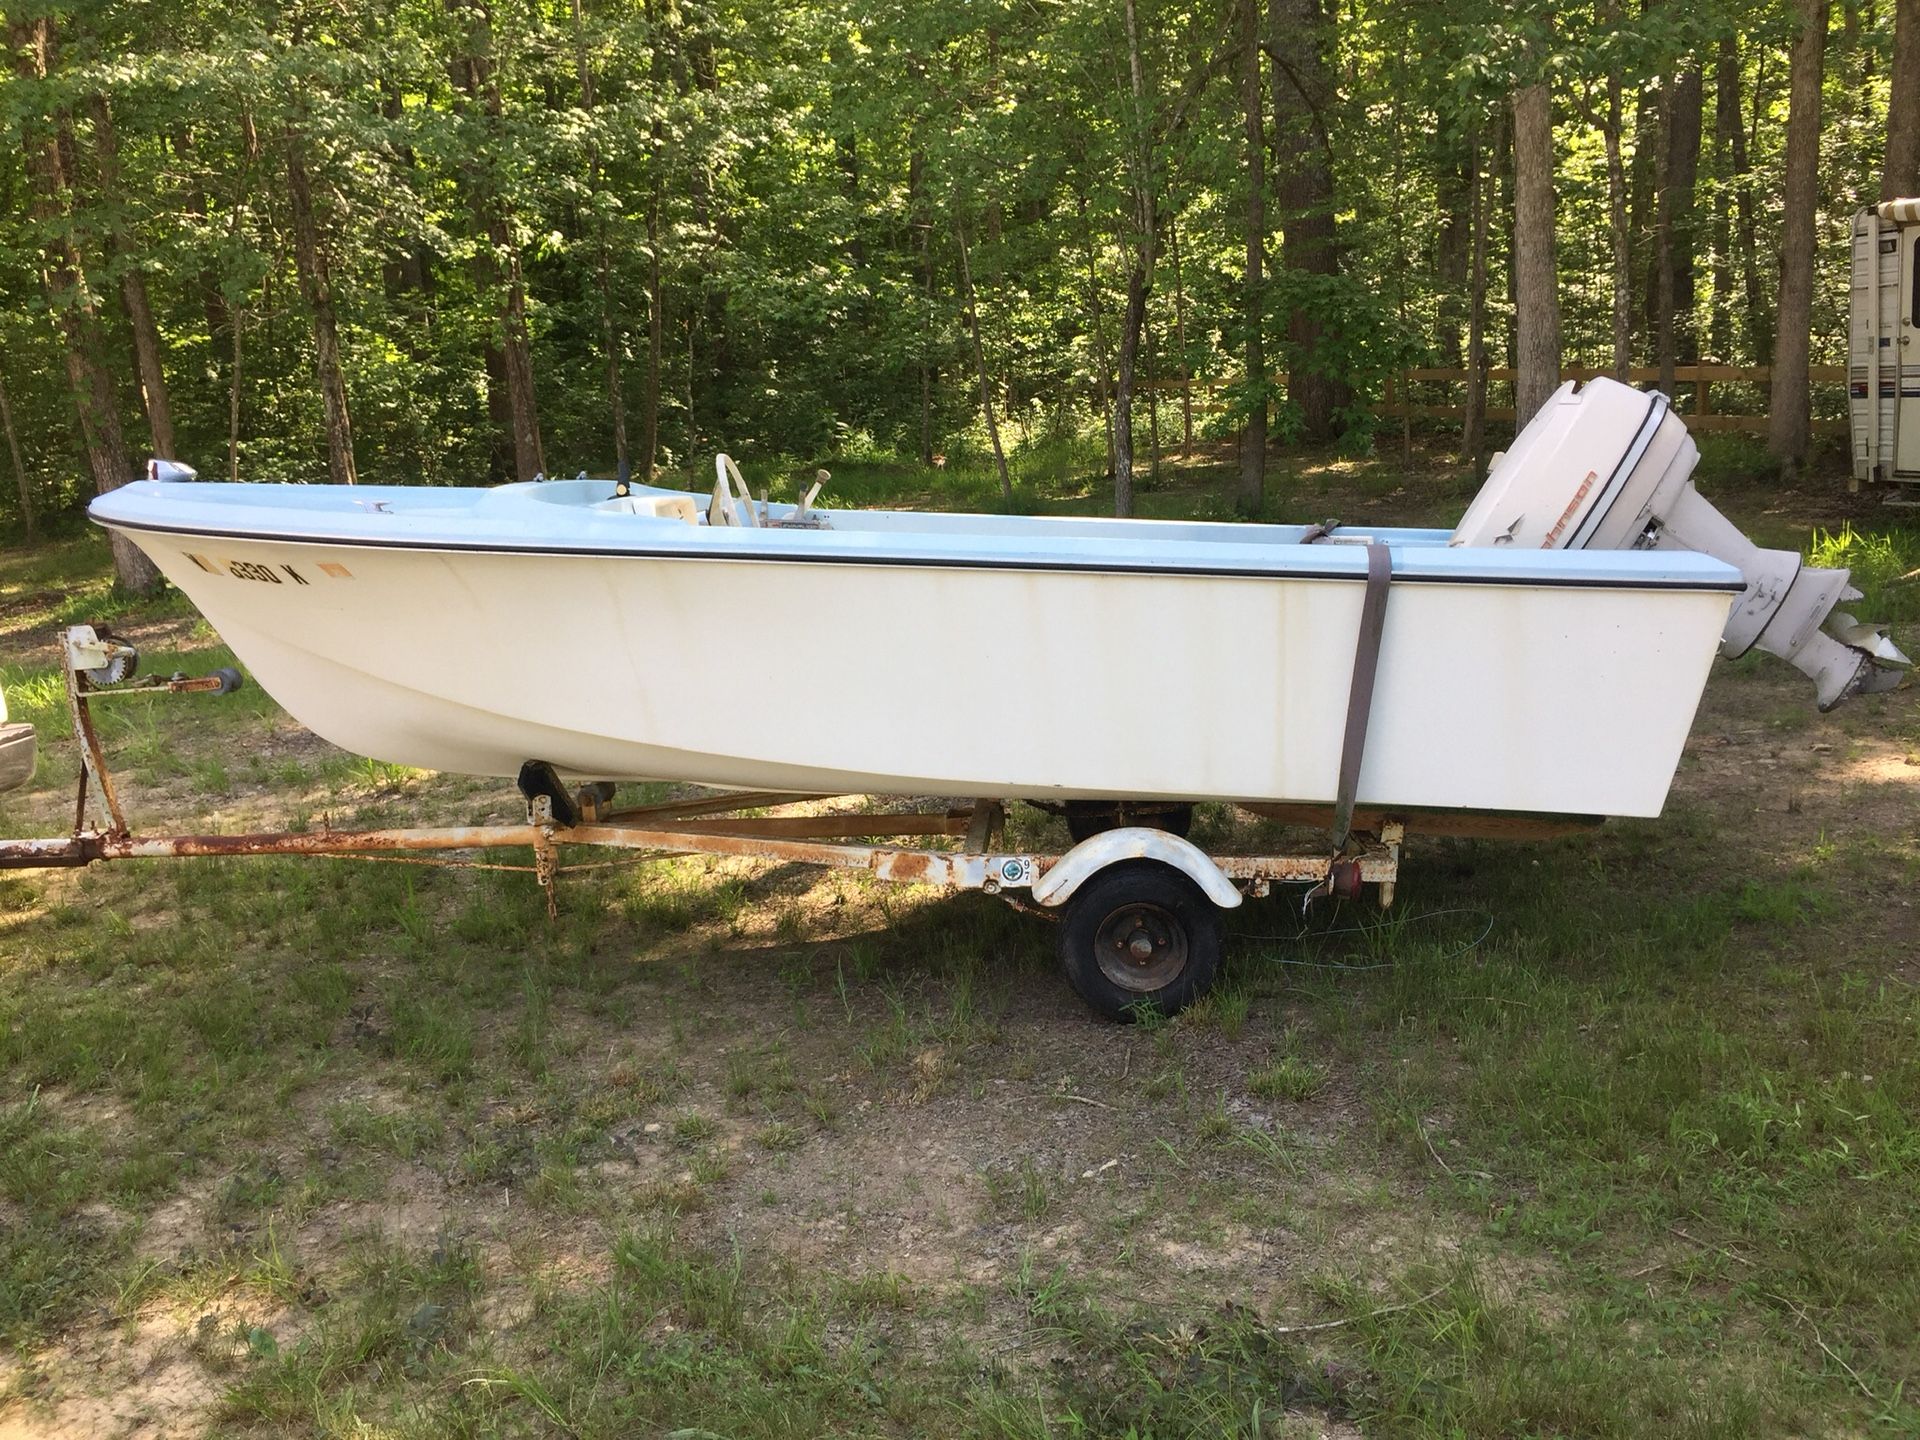 1967 Arrowglass 14ft. Boat and Trailer.